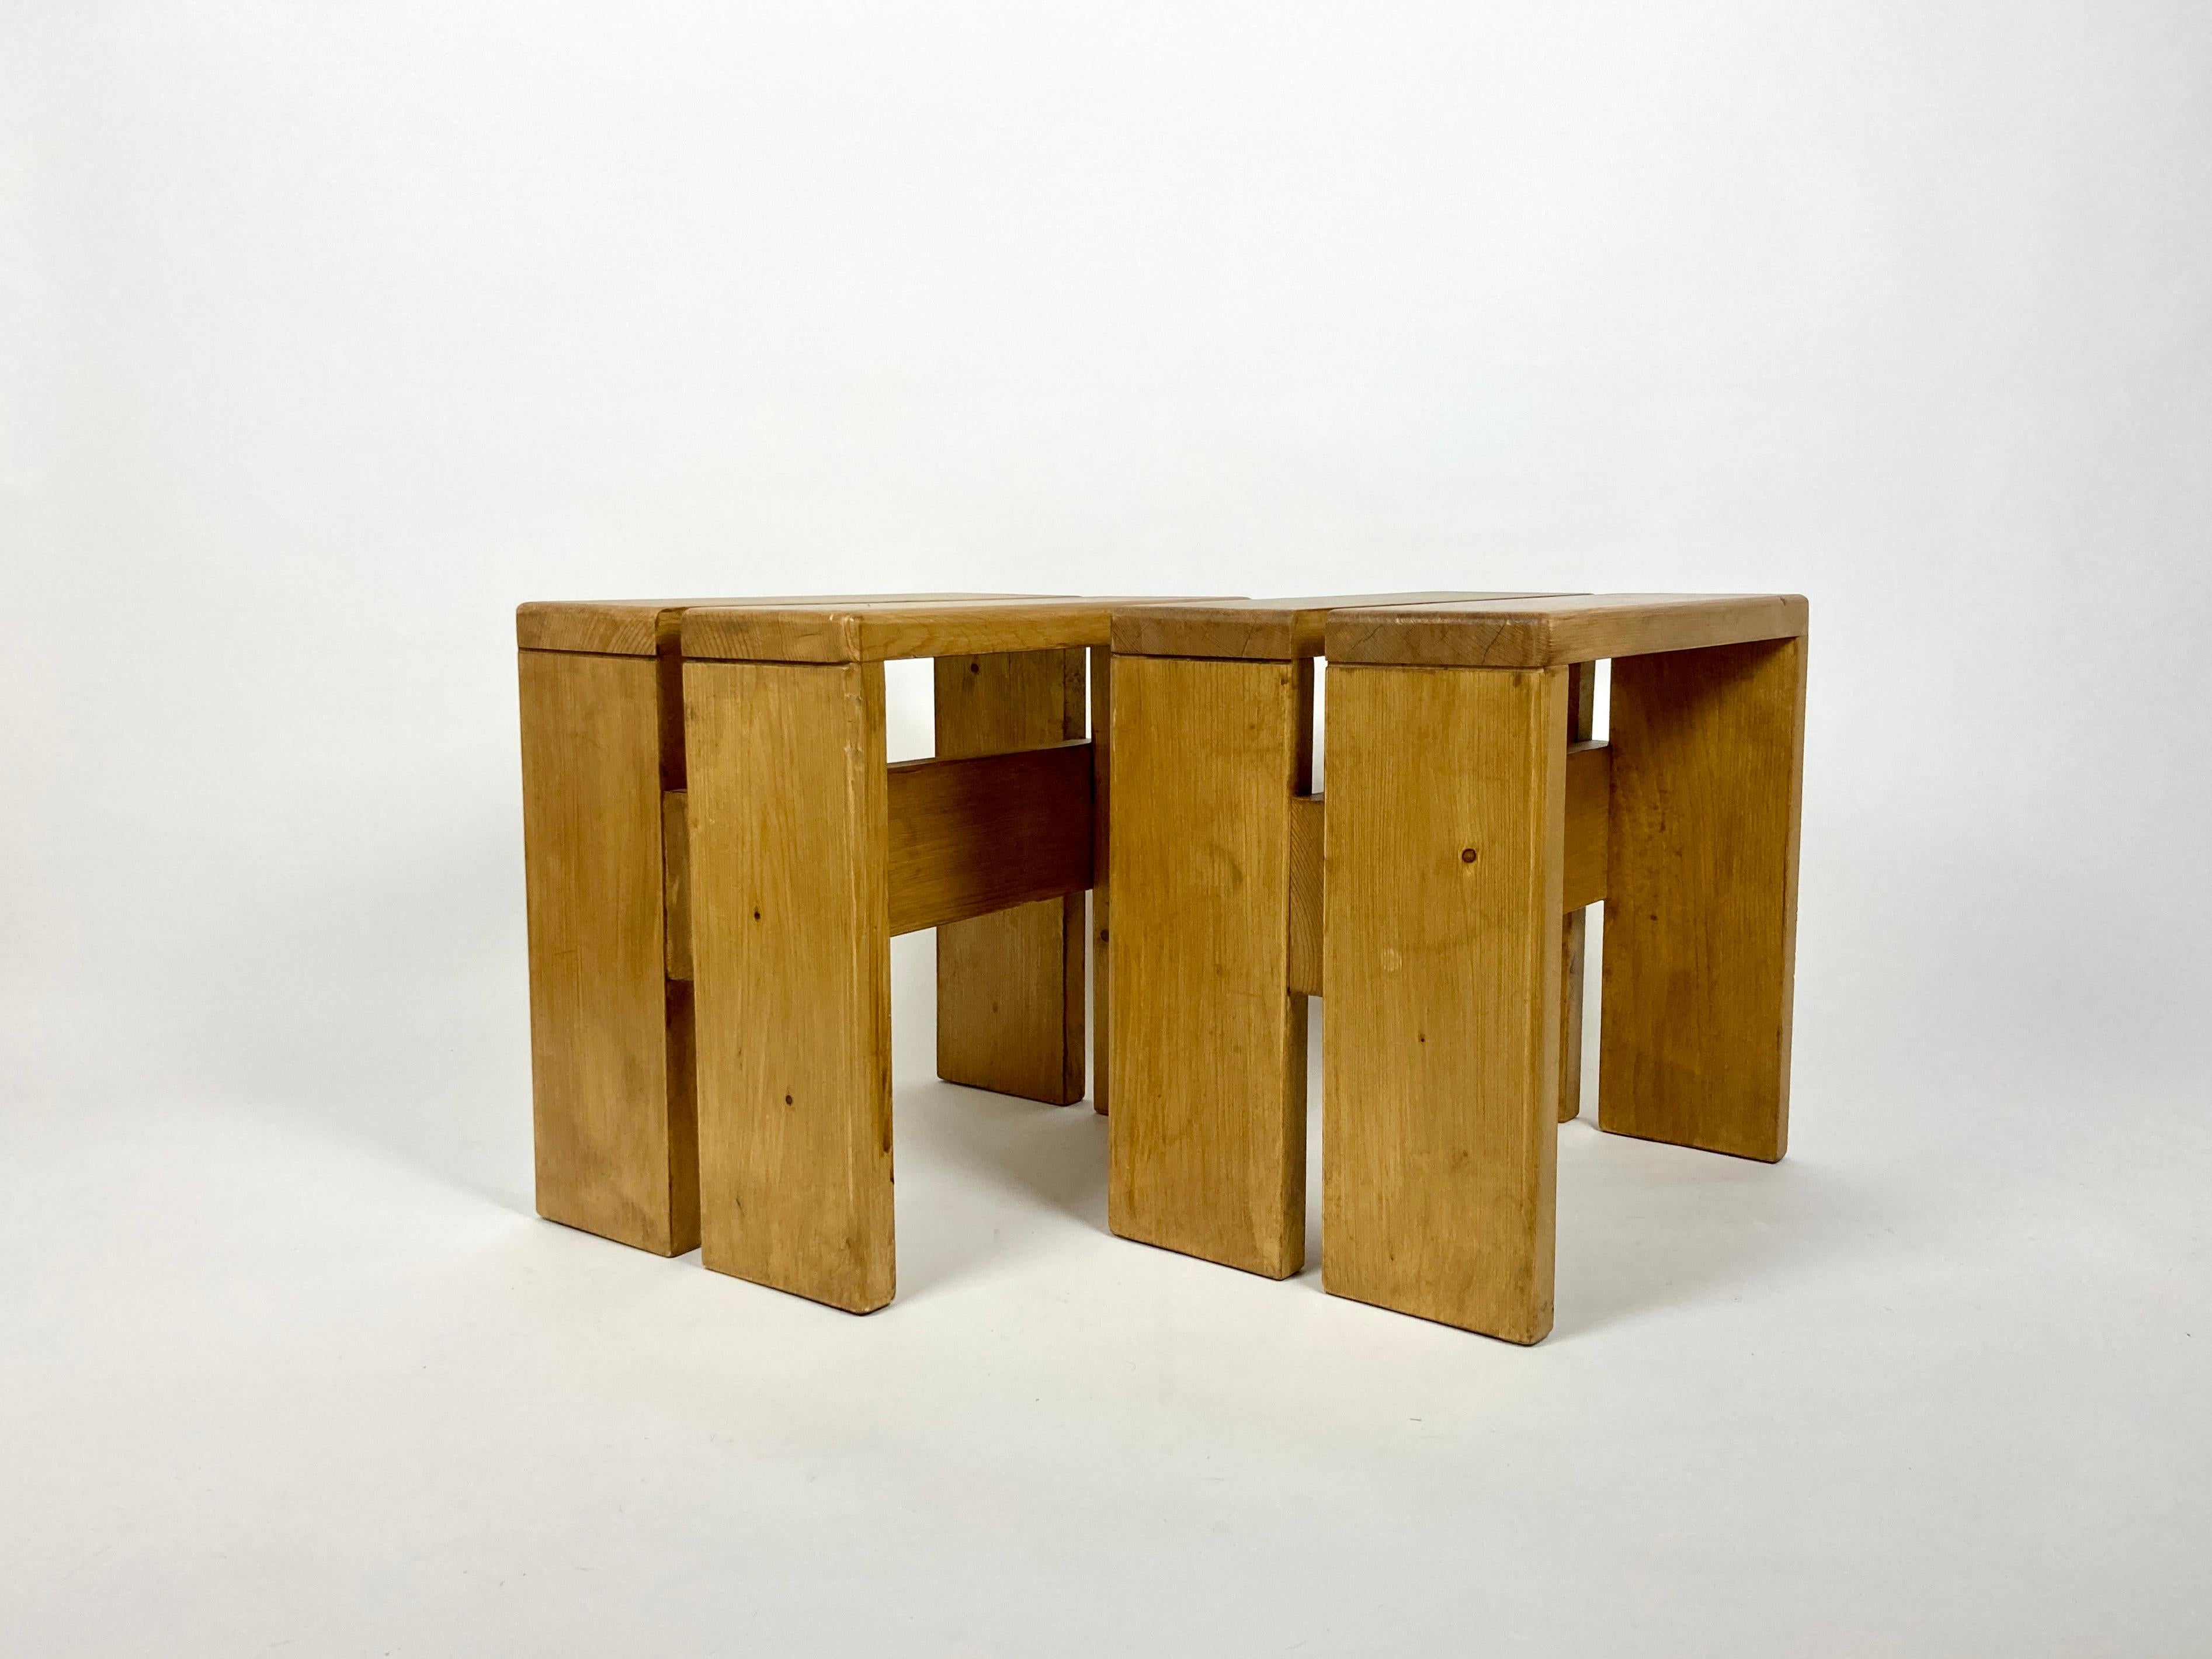 20th Century Set of 2 Stools/Side Tables from Les Arcs, France 1970s, Charlotte Perriand